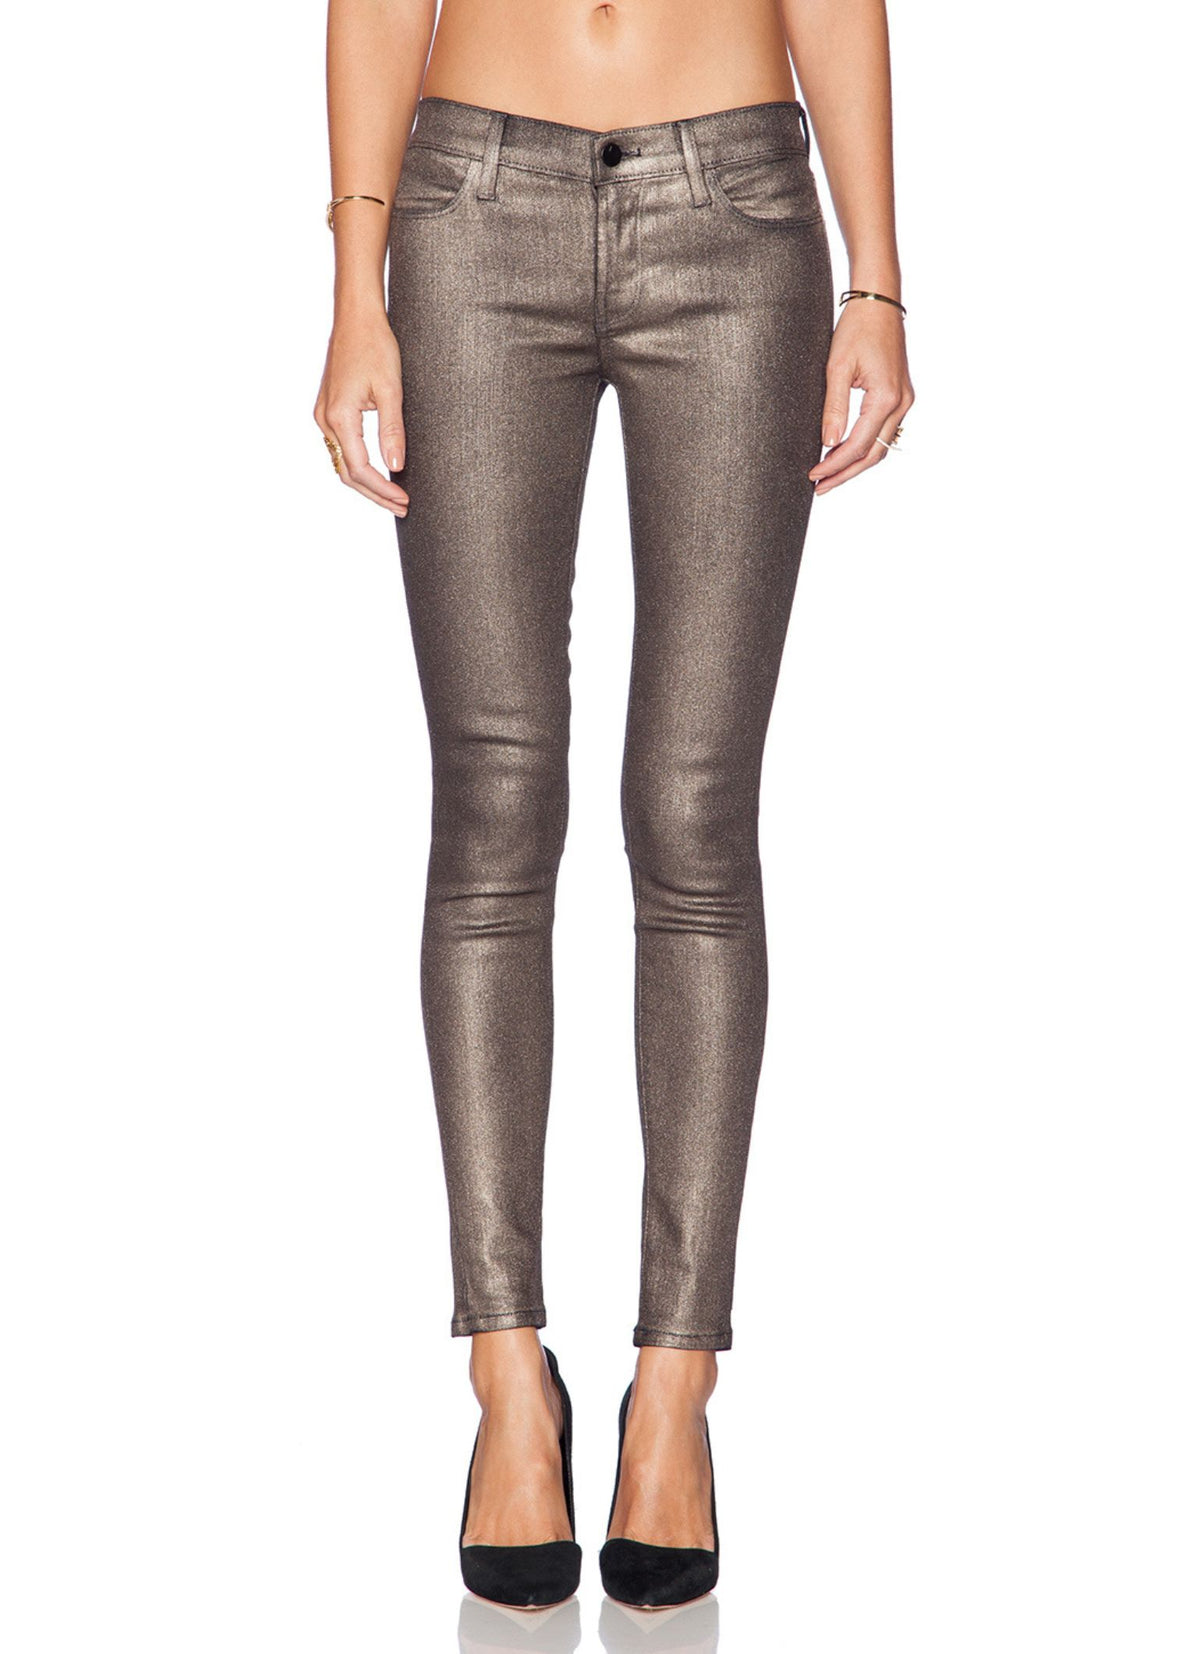 J Brand Super Skinny Gold Dust Jeans - Second Chance